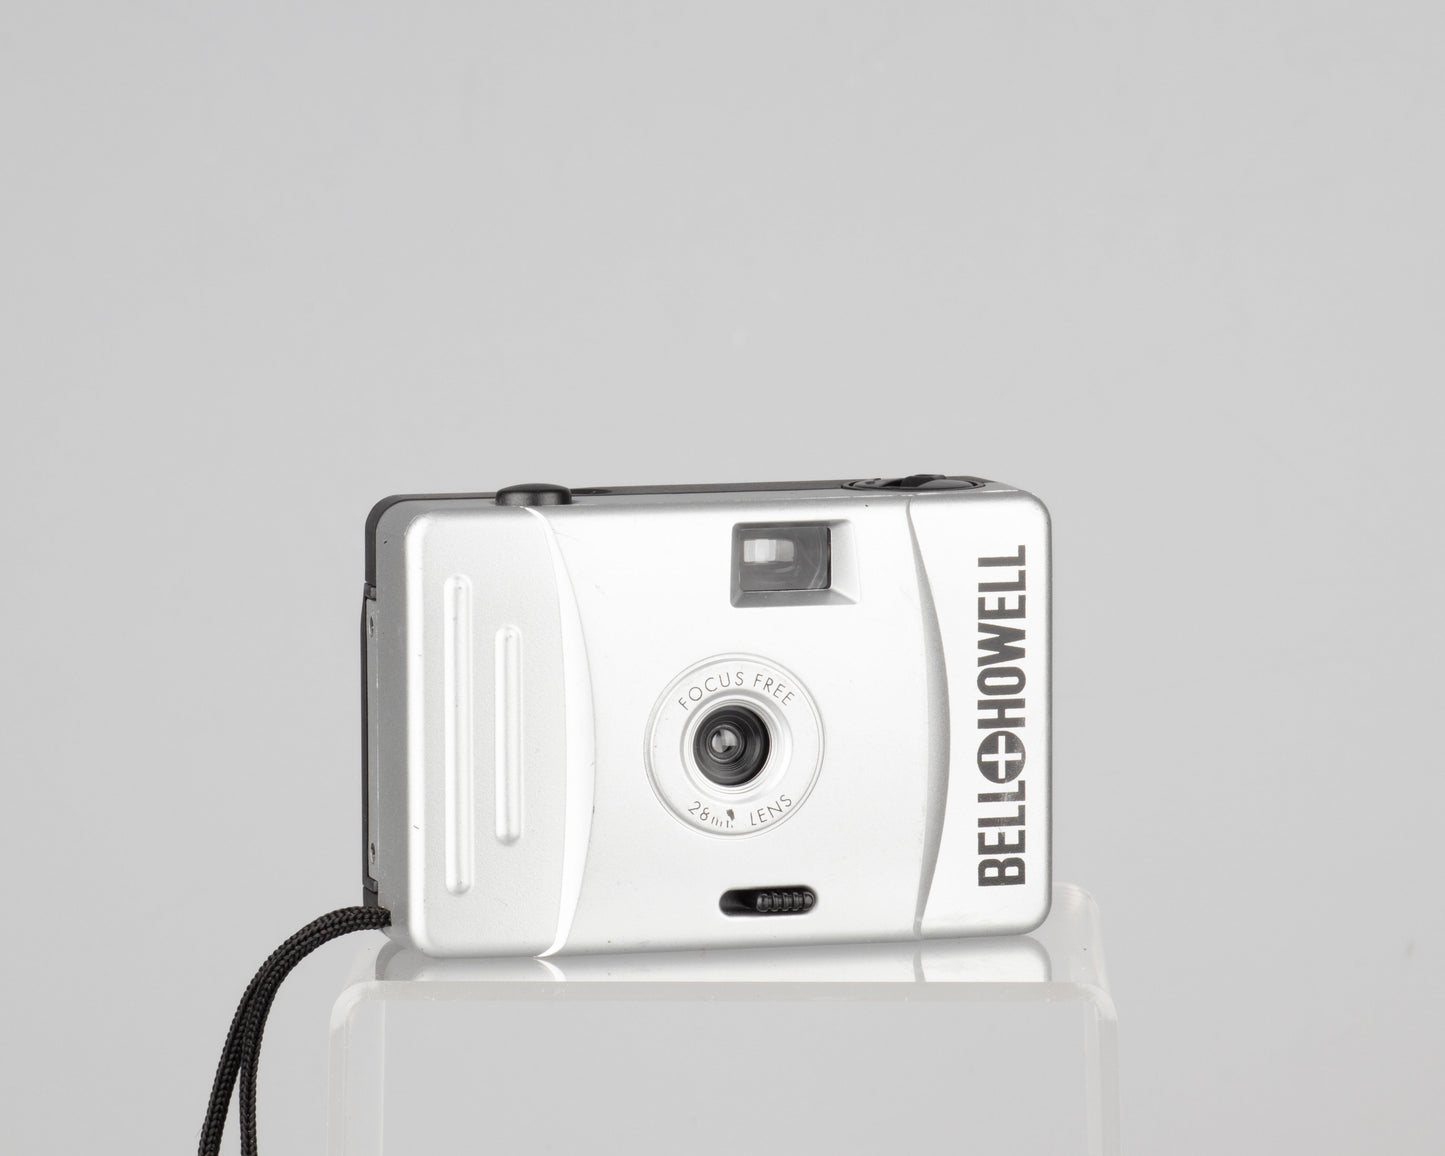 The Bell and Howell Focus Free 28mm is an ultra-compact wide angle point-and-shoot camera